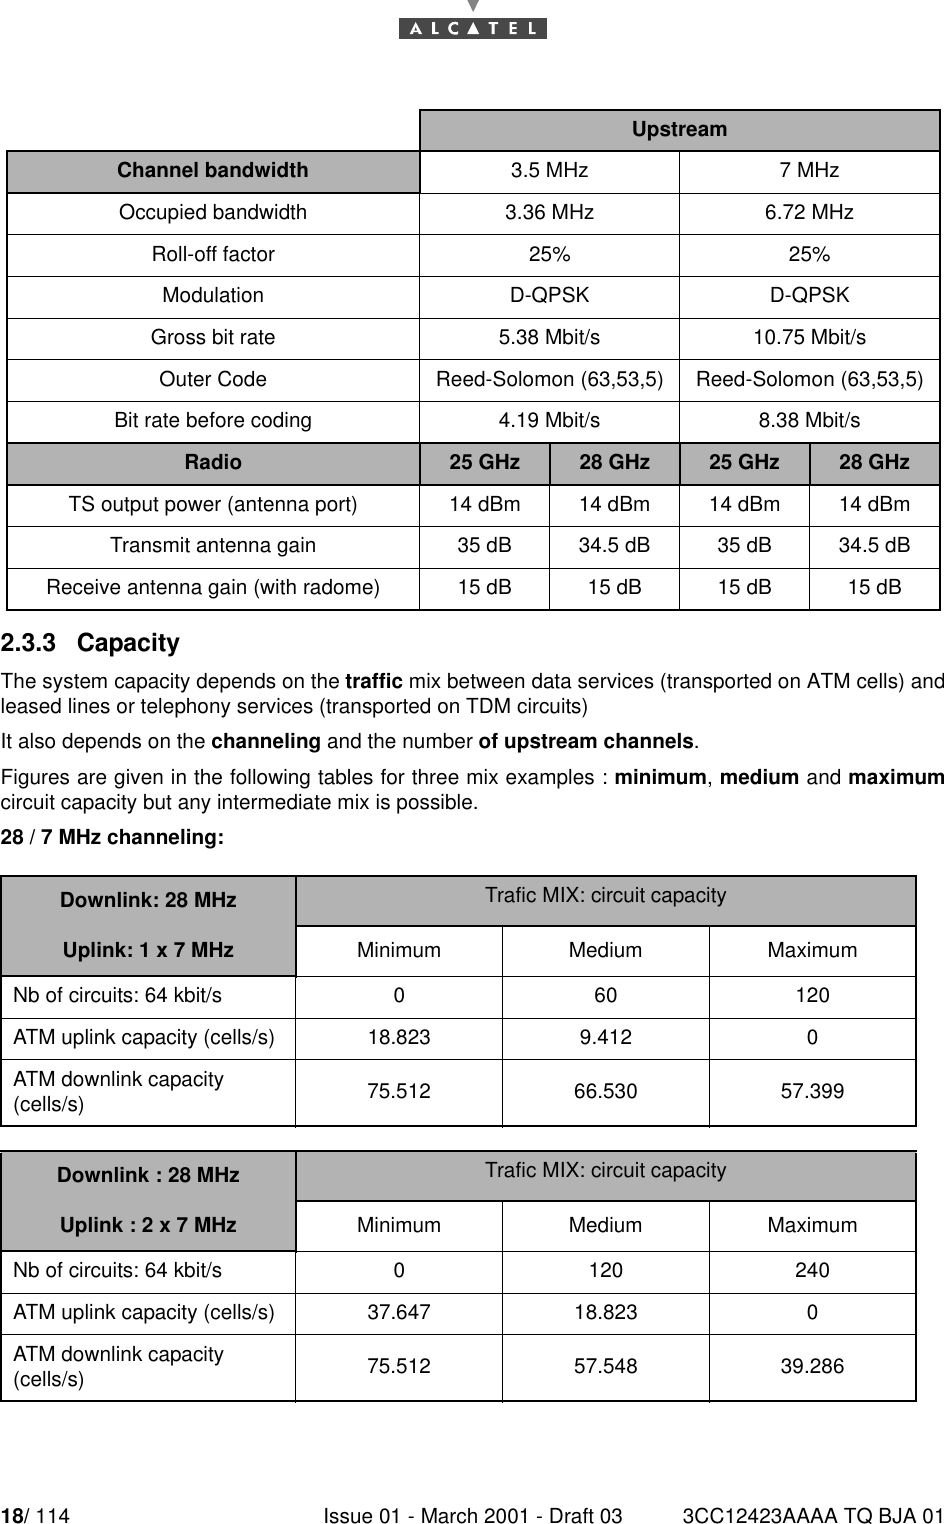 18/ 114 Issue 01 - March 2001 - Draft 03 3CC12423AAAA TQ BJA 01242.3.3   CapacityThe system capacity depends on the traffic mix between data services (transported on ATM cells) andleased lines or telephony services (transported on TDM circuits)It also depends on the channeling and the number of upstream channels.Figures are given in the following tables for three mix examples : minimum, medium and maximumcircuit capacity but any intermediate mix is possible.28 / 7 MHz channeling:UpstreamChannel bandwidth 3.5 MHz 7 MHzOccupied bandwidth 3.36 MHz 6.72 MHzRoll-off factor 25% 25%Modulation D-QPSK D-QPSKGross bit rate 5.38 Mbit/s 10.75 Mbit/sOuter Code Reed-Solomon (63,53,5) Reed-Solomon (63,53,5)Bit rate before coding 4.19 Mbit/s 8.38 Mbit/sRadio 25 GHz 28 GHz 25 GHz 28 GHzTS output power (antenna port) 14 dBm 14 dBm 14 dBm 14 dBmTransmit antenna gain 35 dB 34.5 dB 35 dB 34.5 dBReceive antenna gain (with radome) 15 dB 15 dB 15 dB 15 dBDownlink: 28 MHz Trafic MIX: circuit capacityUplink: 1 x 7 MHz Minimum Medium MaximumNb of circuits: 64 kbit/s 0 60 120ATM uplink capacity (cells/s) 18.823 9.412 0ATM downlink capacity(cells/s) 75.512 66.530 57.399Downlink : 28 MHz Trafic MIX: circuit capacityUplink : 2 x 7 MHz Minimum Medium MaximumNb of circuits: 64 kbit/s 0 120 240ATM uplink capacity (cells/s) 37.647 18.823 0ATM downlink capacity(cells/s) 75.512 57.548 39.286